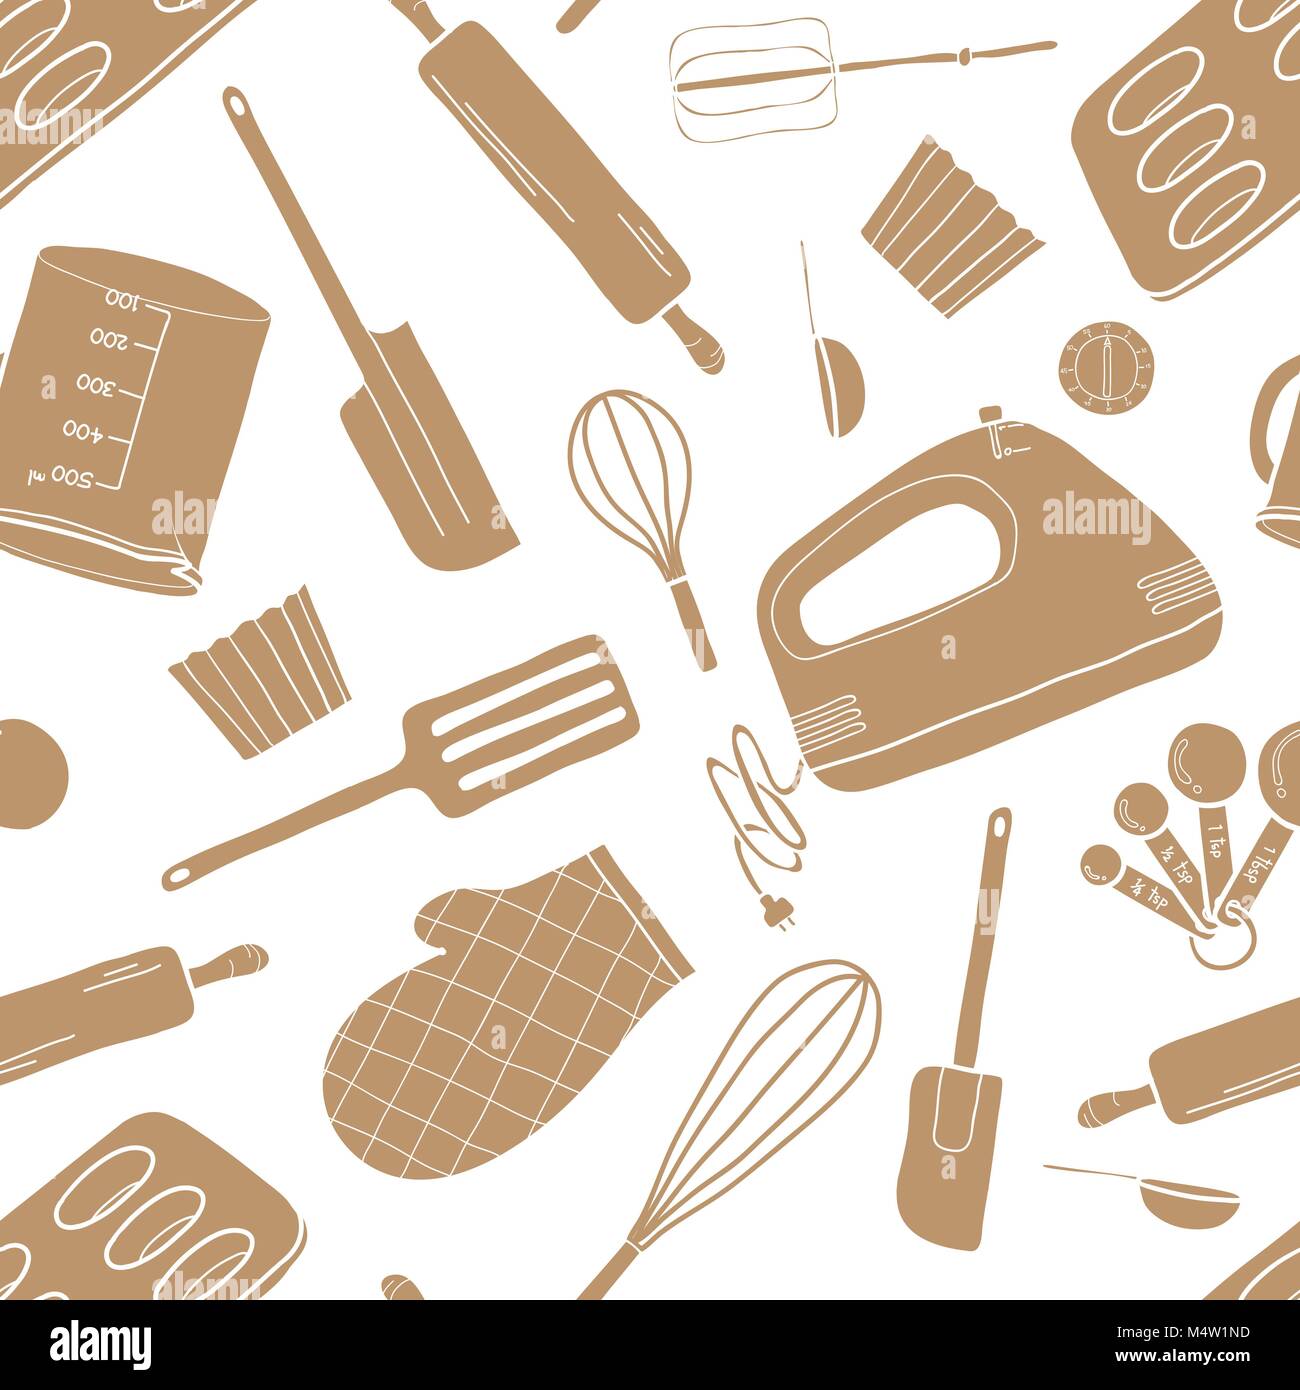 cute cooking background